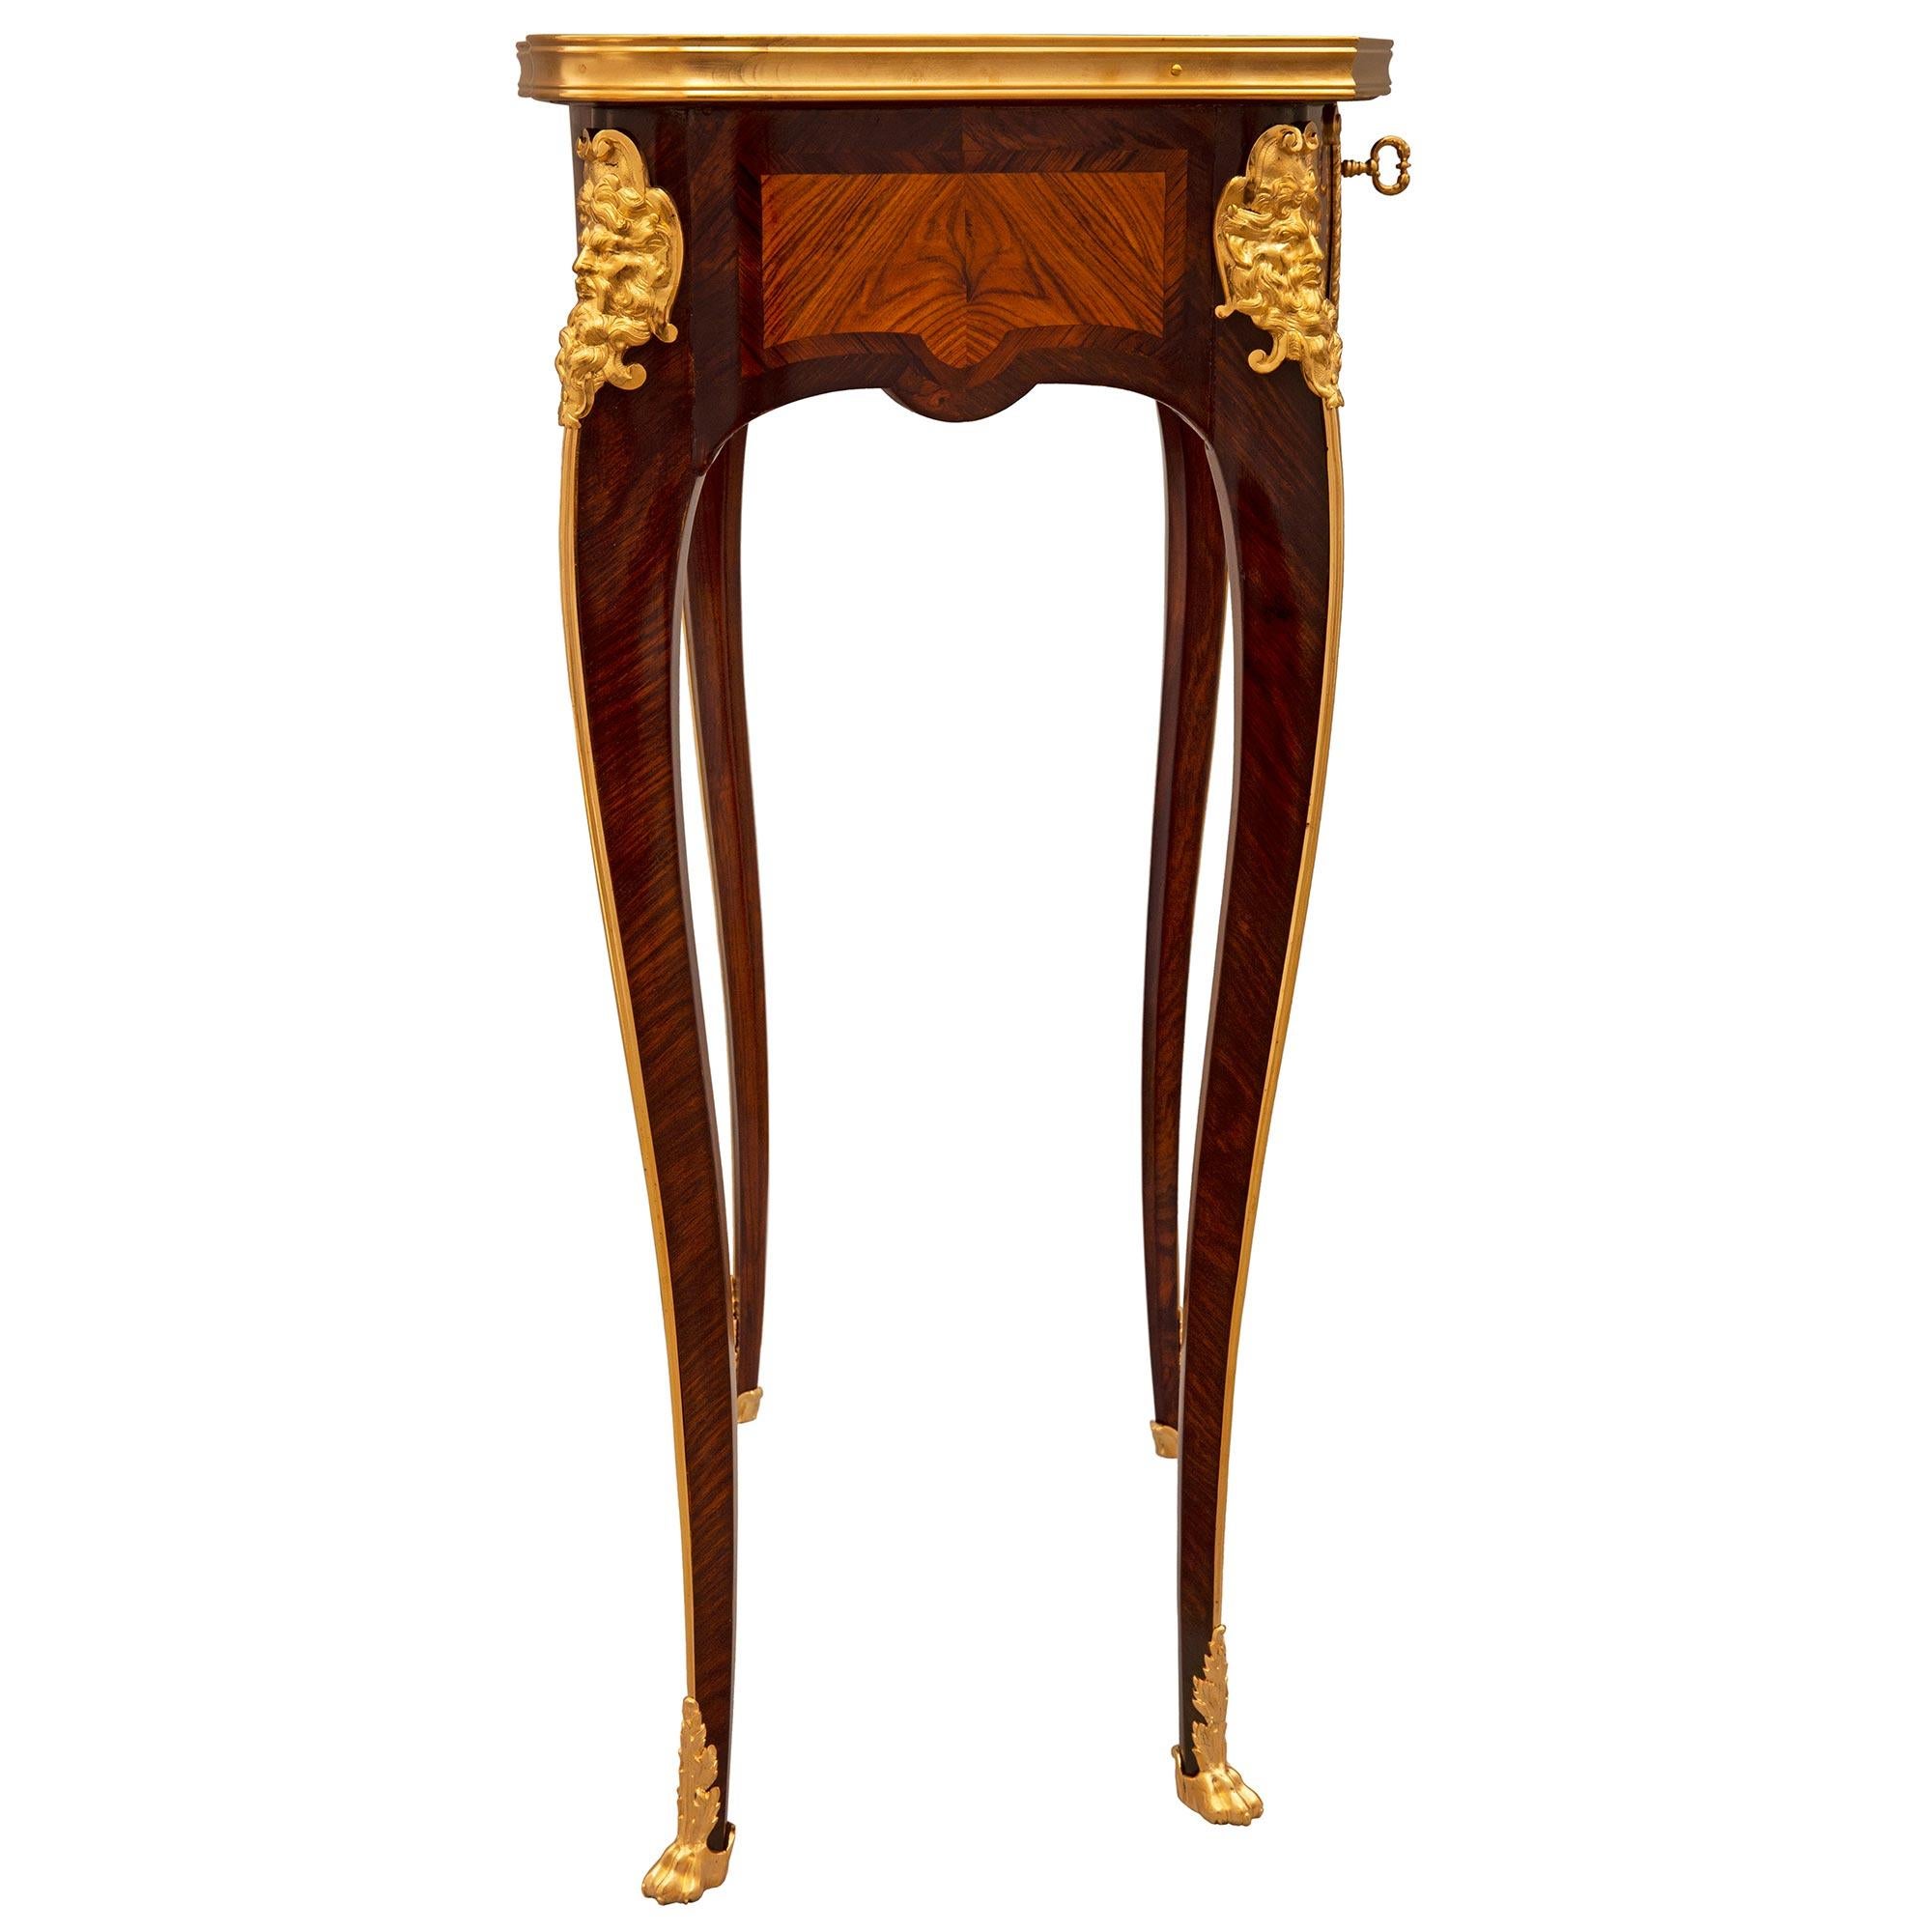 French 19th Century Belle Epoque Period Tulipwood, Kingwood & Ormolu Side Table For Sale 1